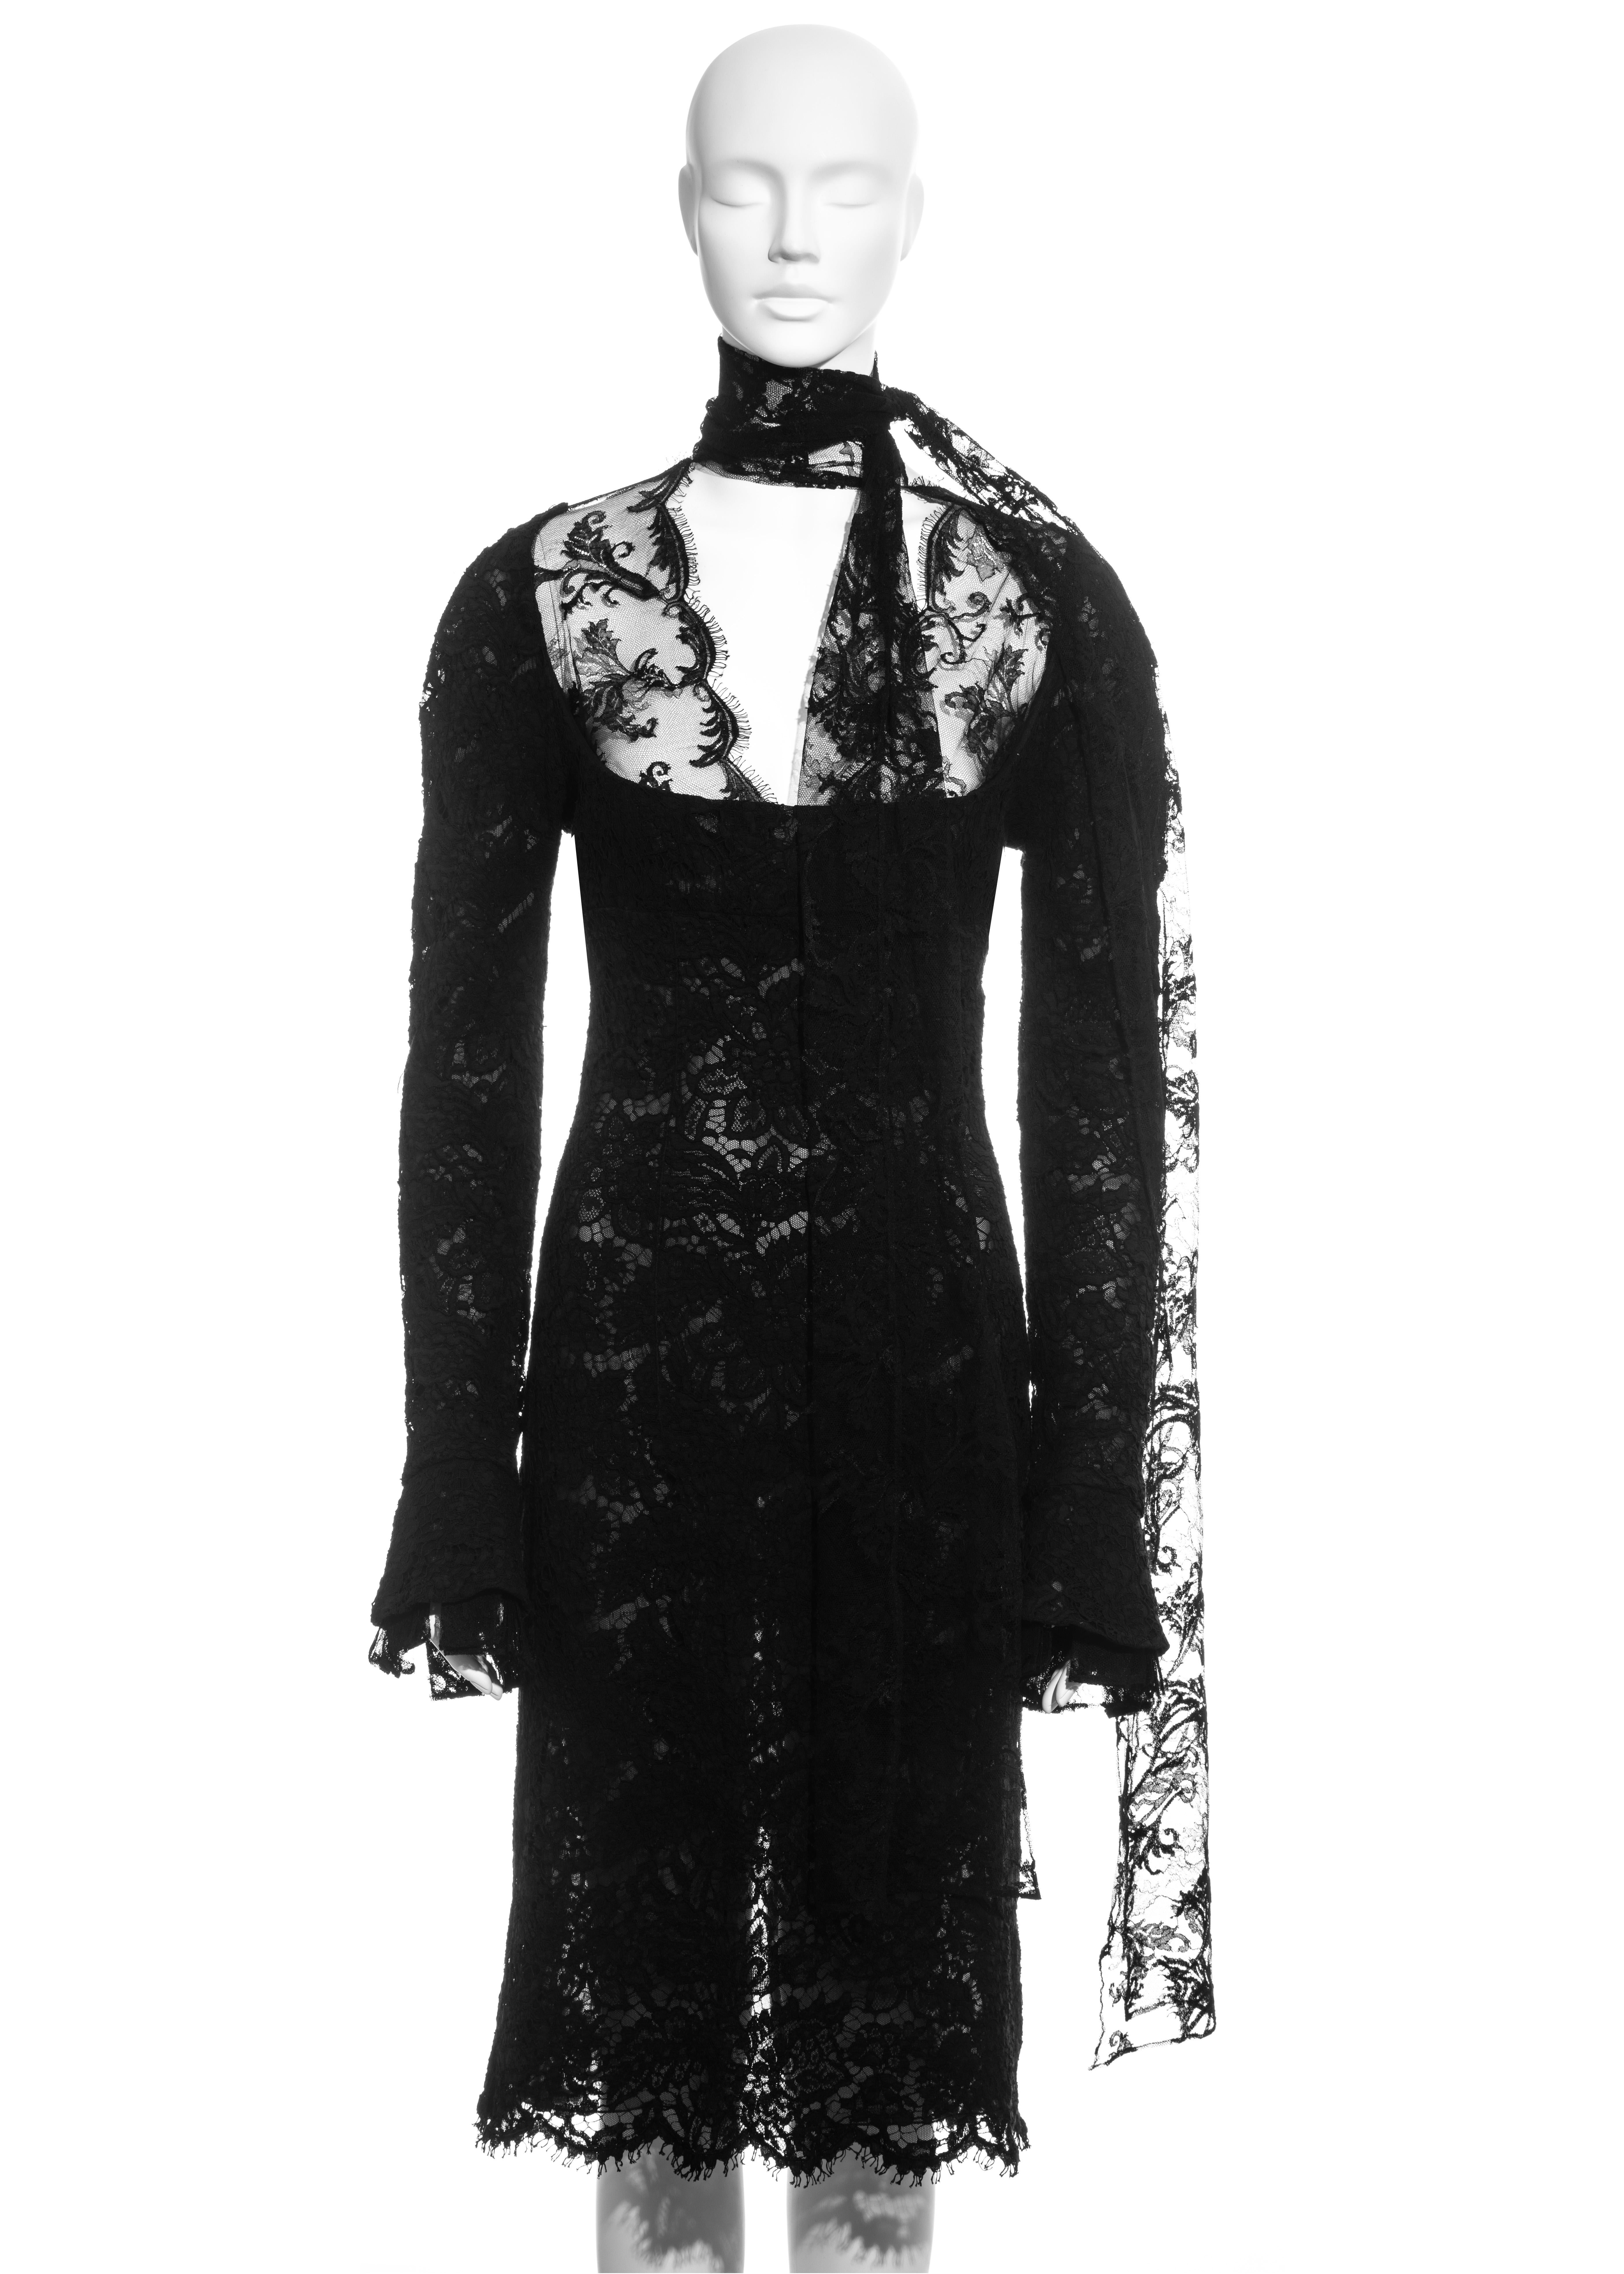 ▪ Yves Saint Laurent black lace long-sleeve evening dress
▪ Designed by Tom Ford
▪ Sold by One of a Kind Archive
▪ Silk organza lining 
▪ Long scarf neck fastening 
▪ Dropped pleated cuffs
▪ Bust 34